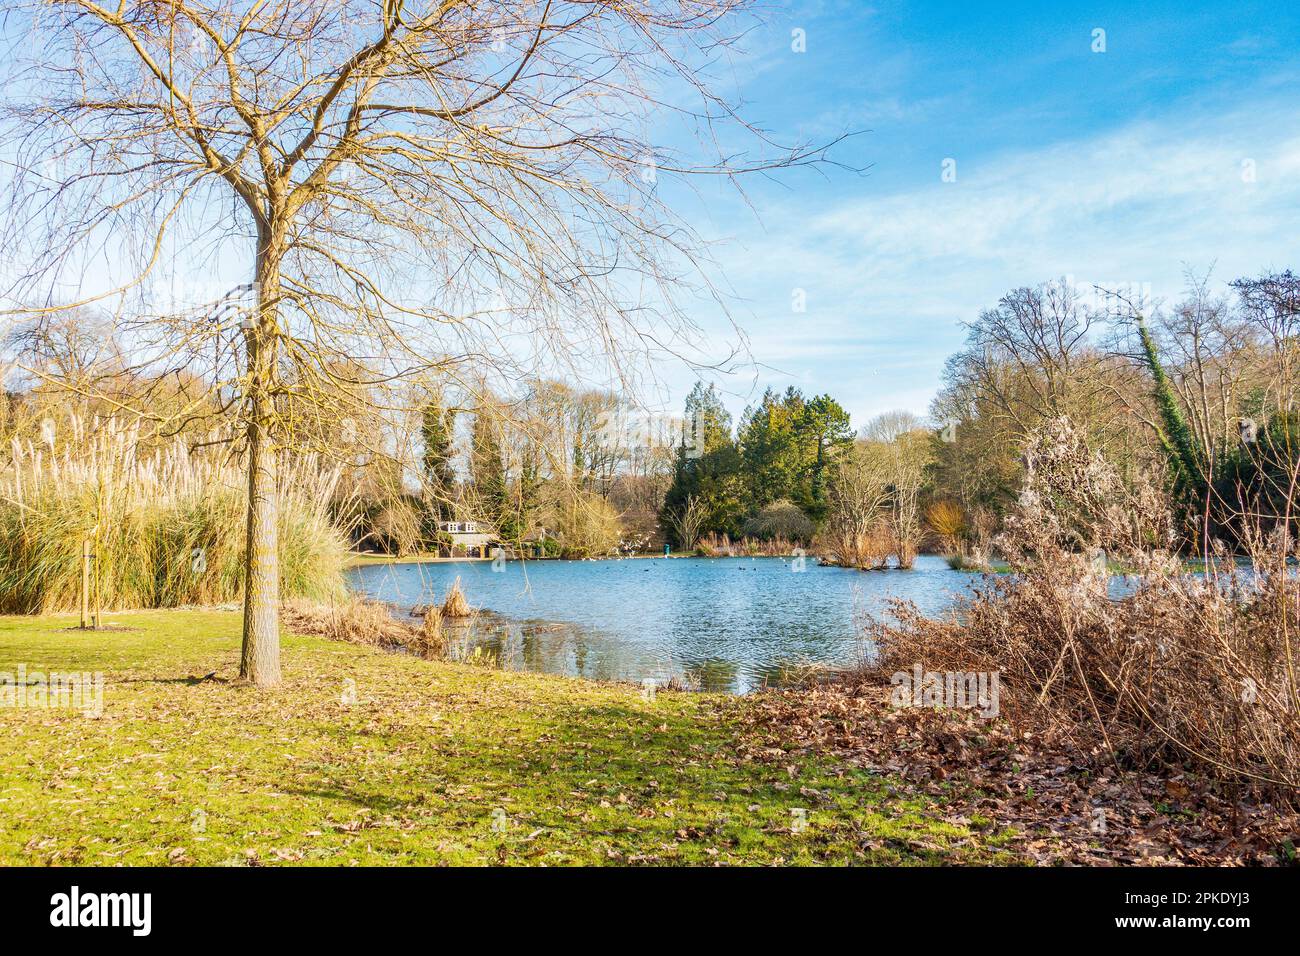 Lac, jardins Russell, hiver, Abbaye de Kearsney, Kearsney, Douvres, Kent, Angleterre Banque D'Images